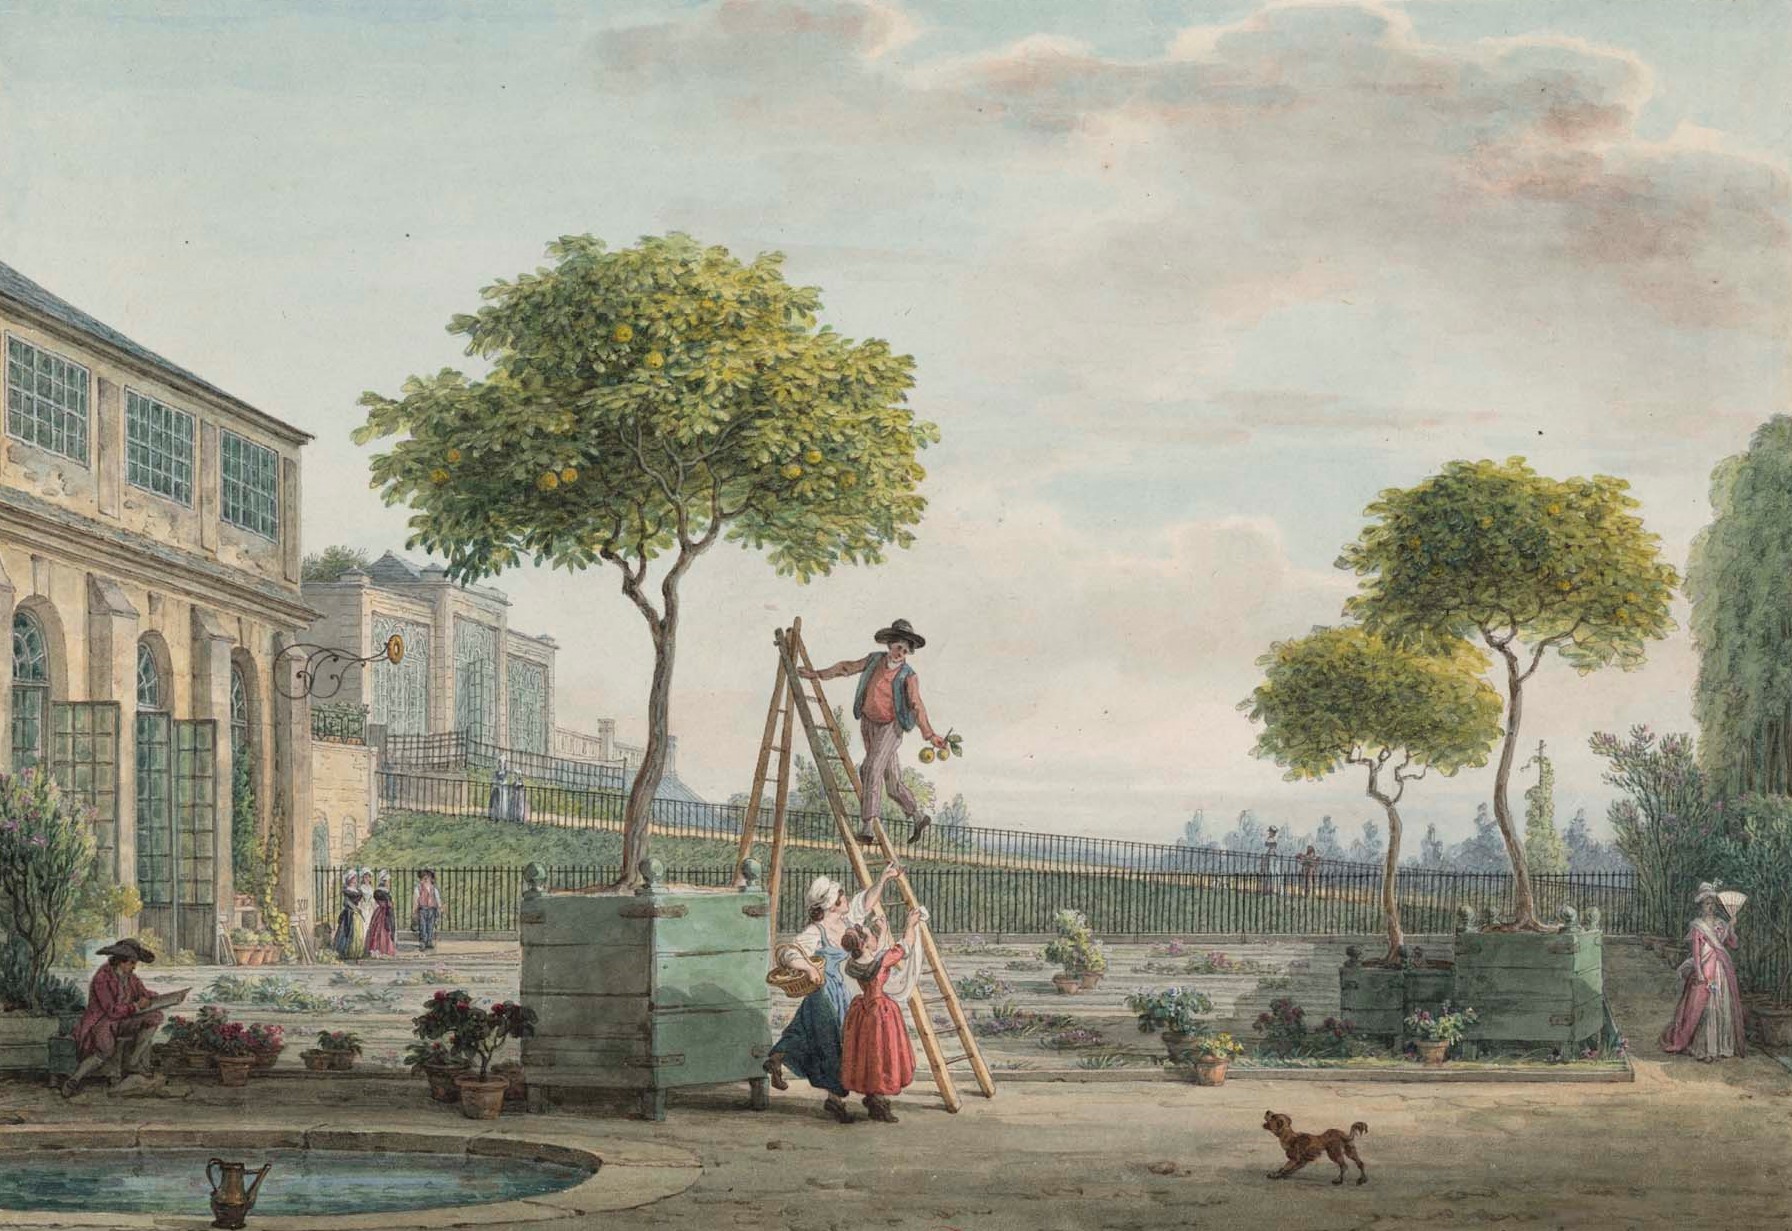 Jean-Baptiste Hilair sketches gardeners picking fruit in the Orangerie in the Jardin des Plantes. Drawing in the collection of the Bibliothèque nationale de France, press photo courtesy of the Clark Art Institute